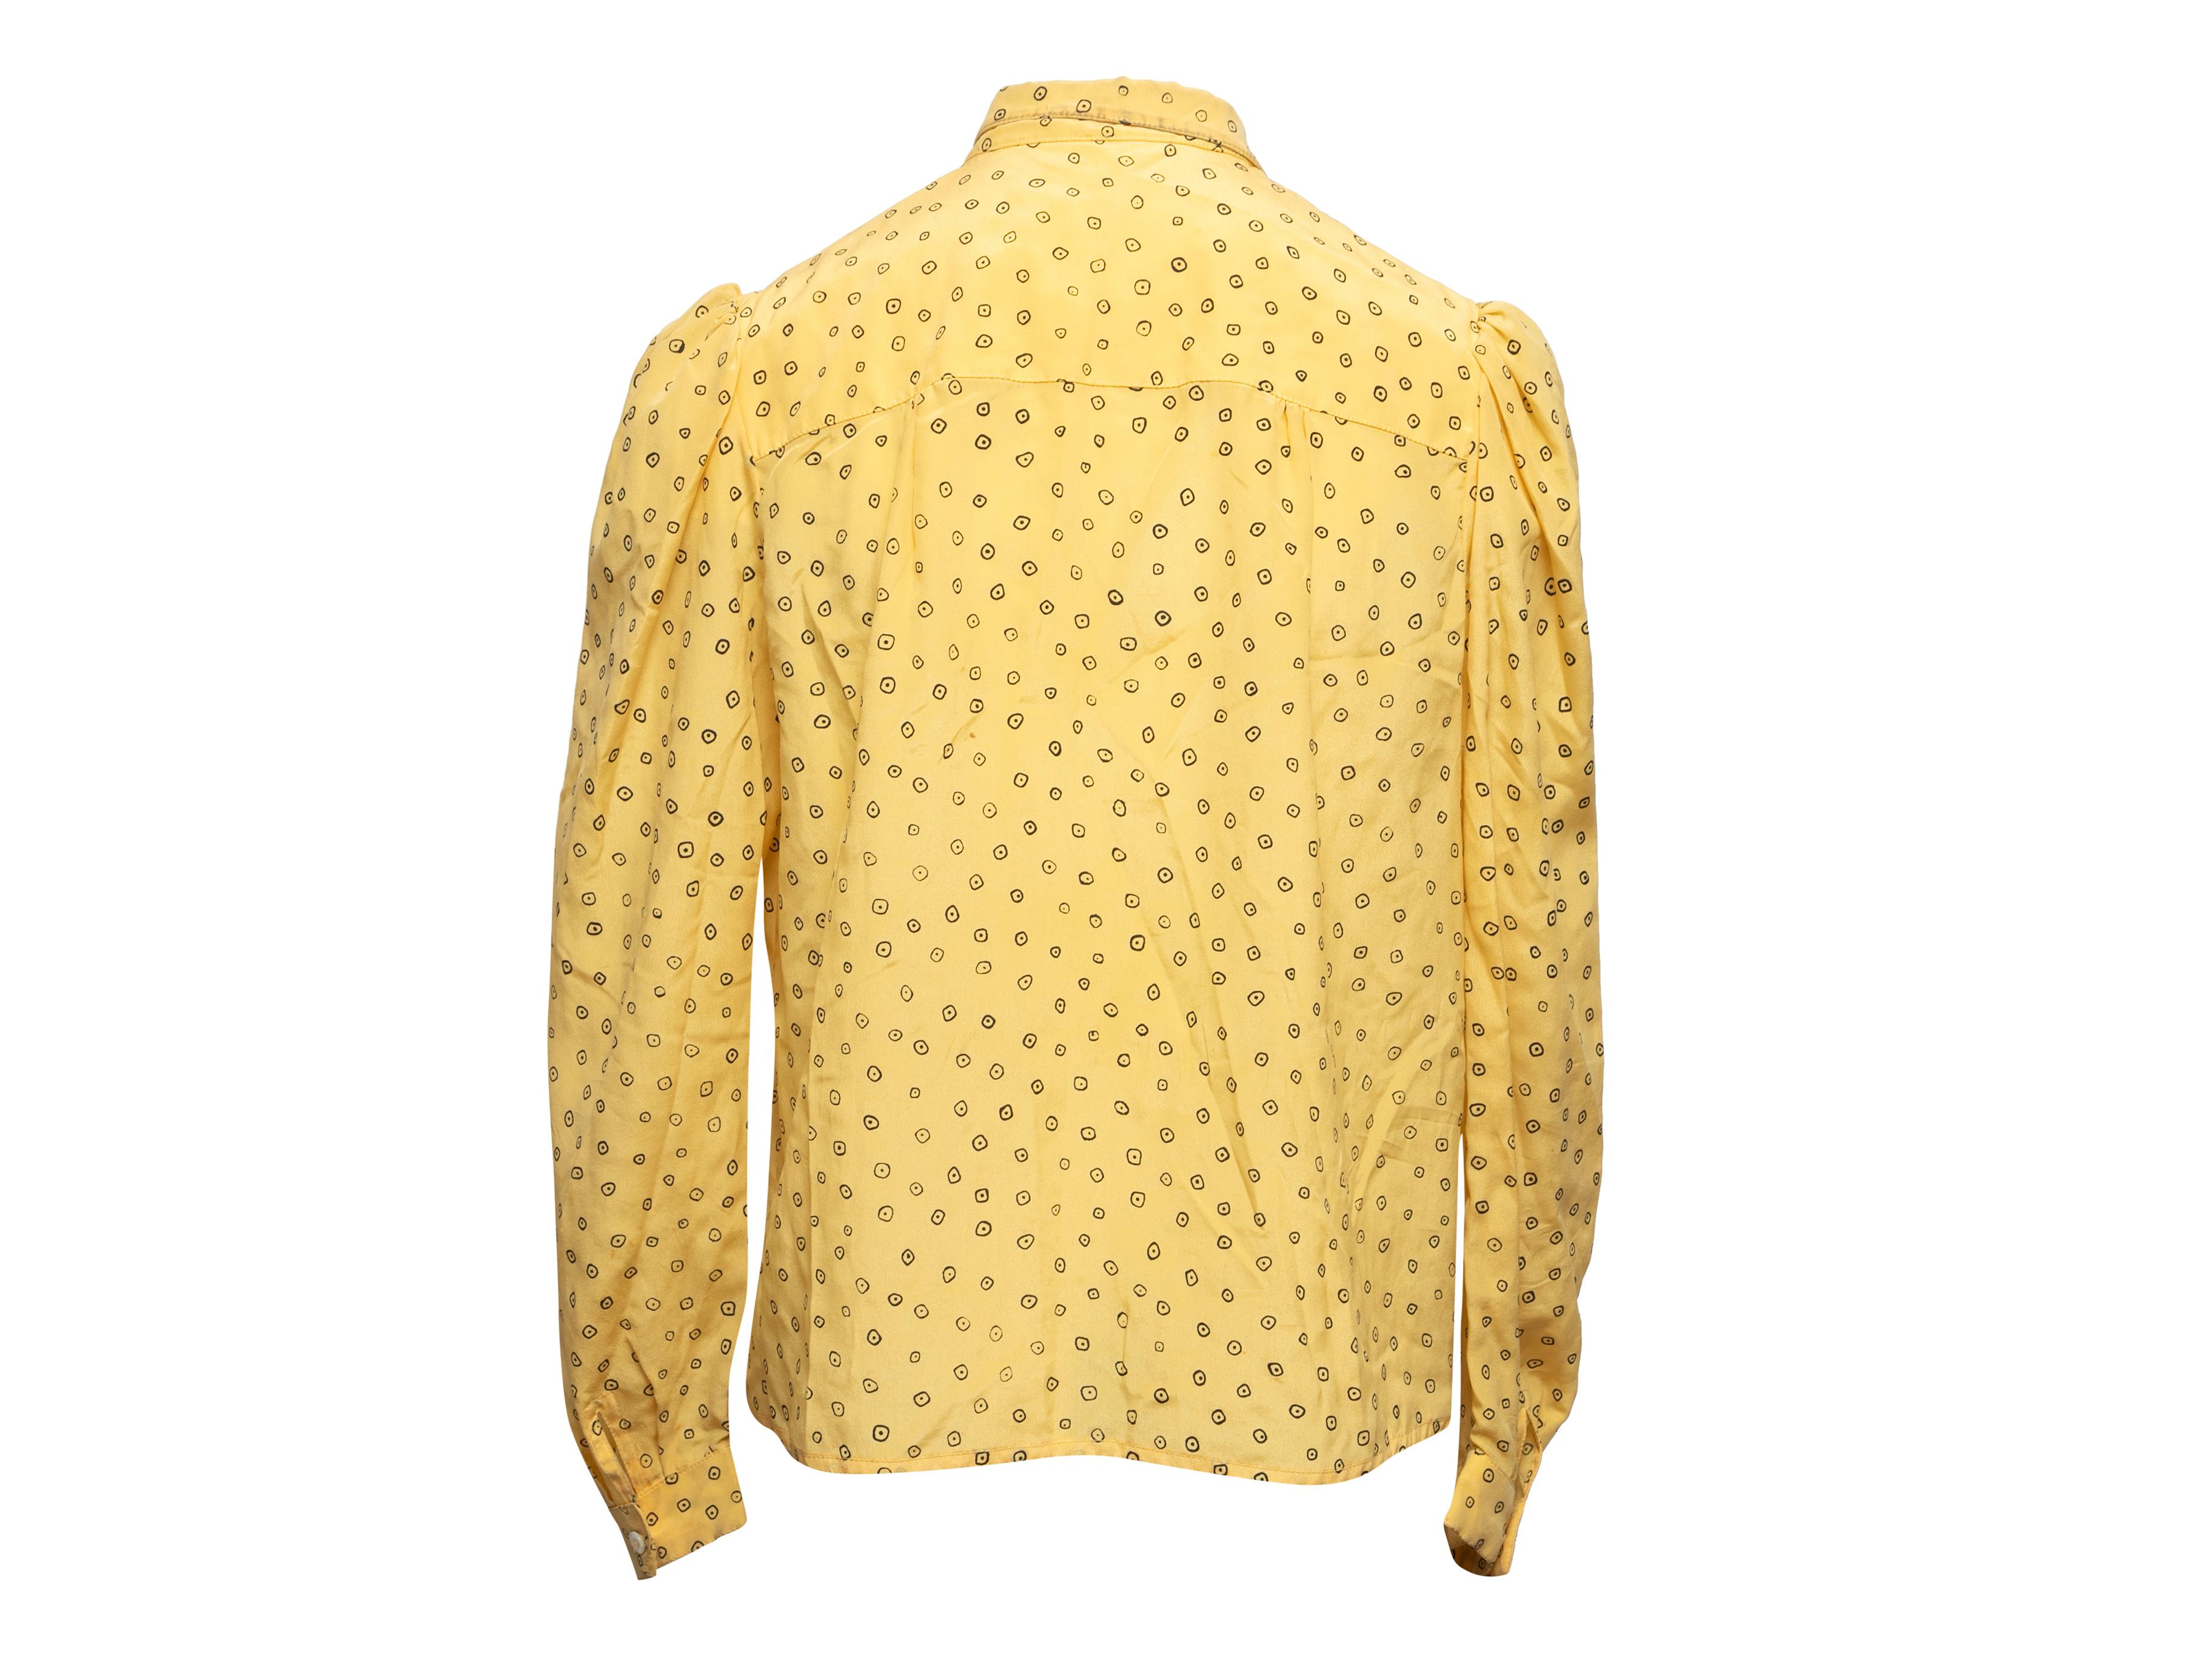 Vintage Yellow & Black Jan Vanvelden Printed Silk Blouse Size US S/M In Good Condition For Sale In New York, NY